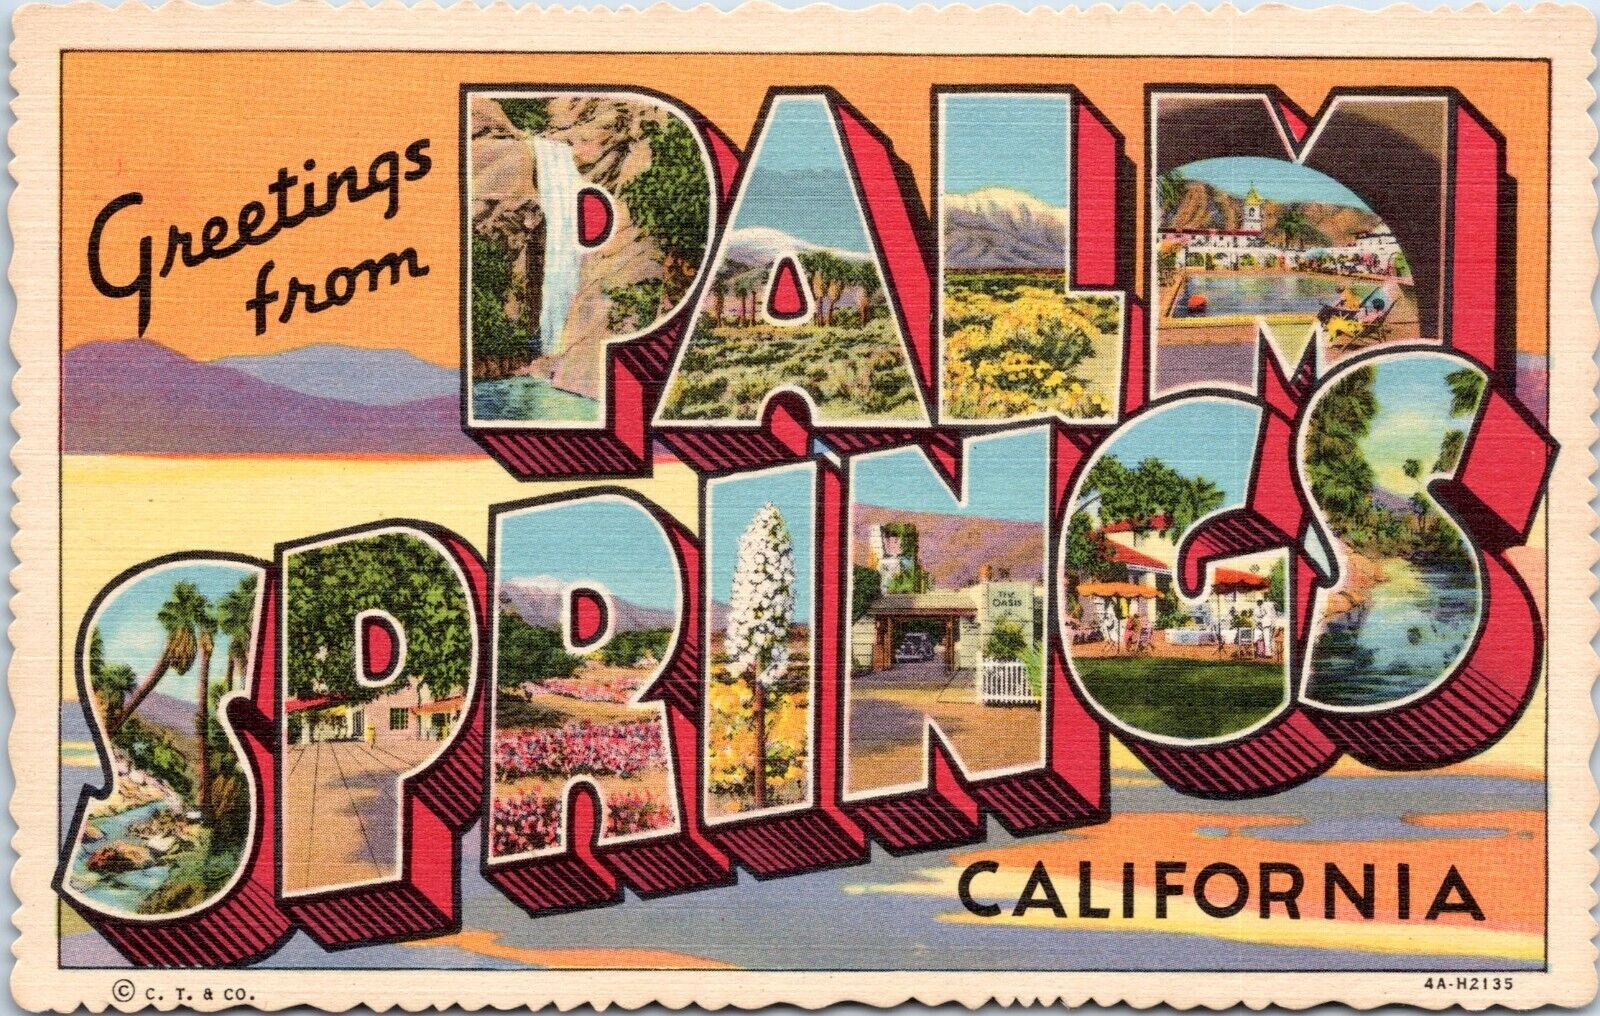 Large Letter Greetings, Palm Springs California- 1934 Linen Postcard Curt Teich